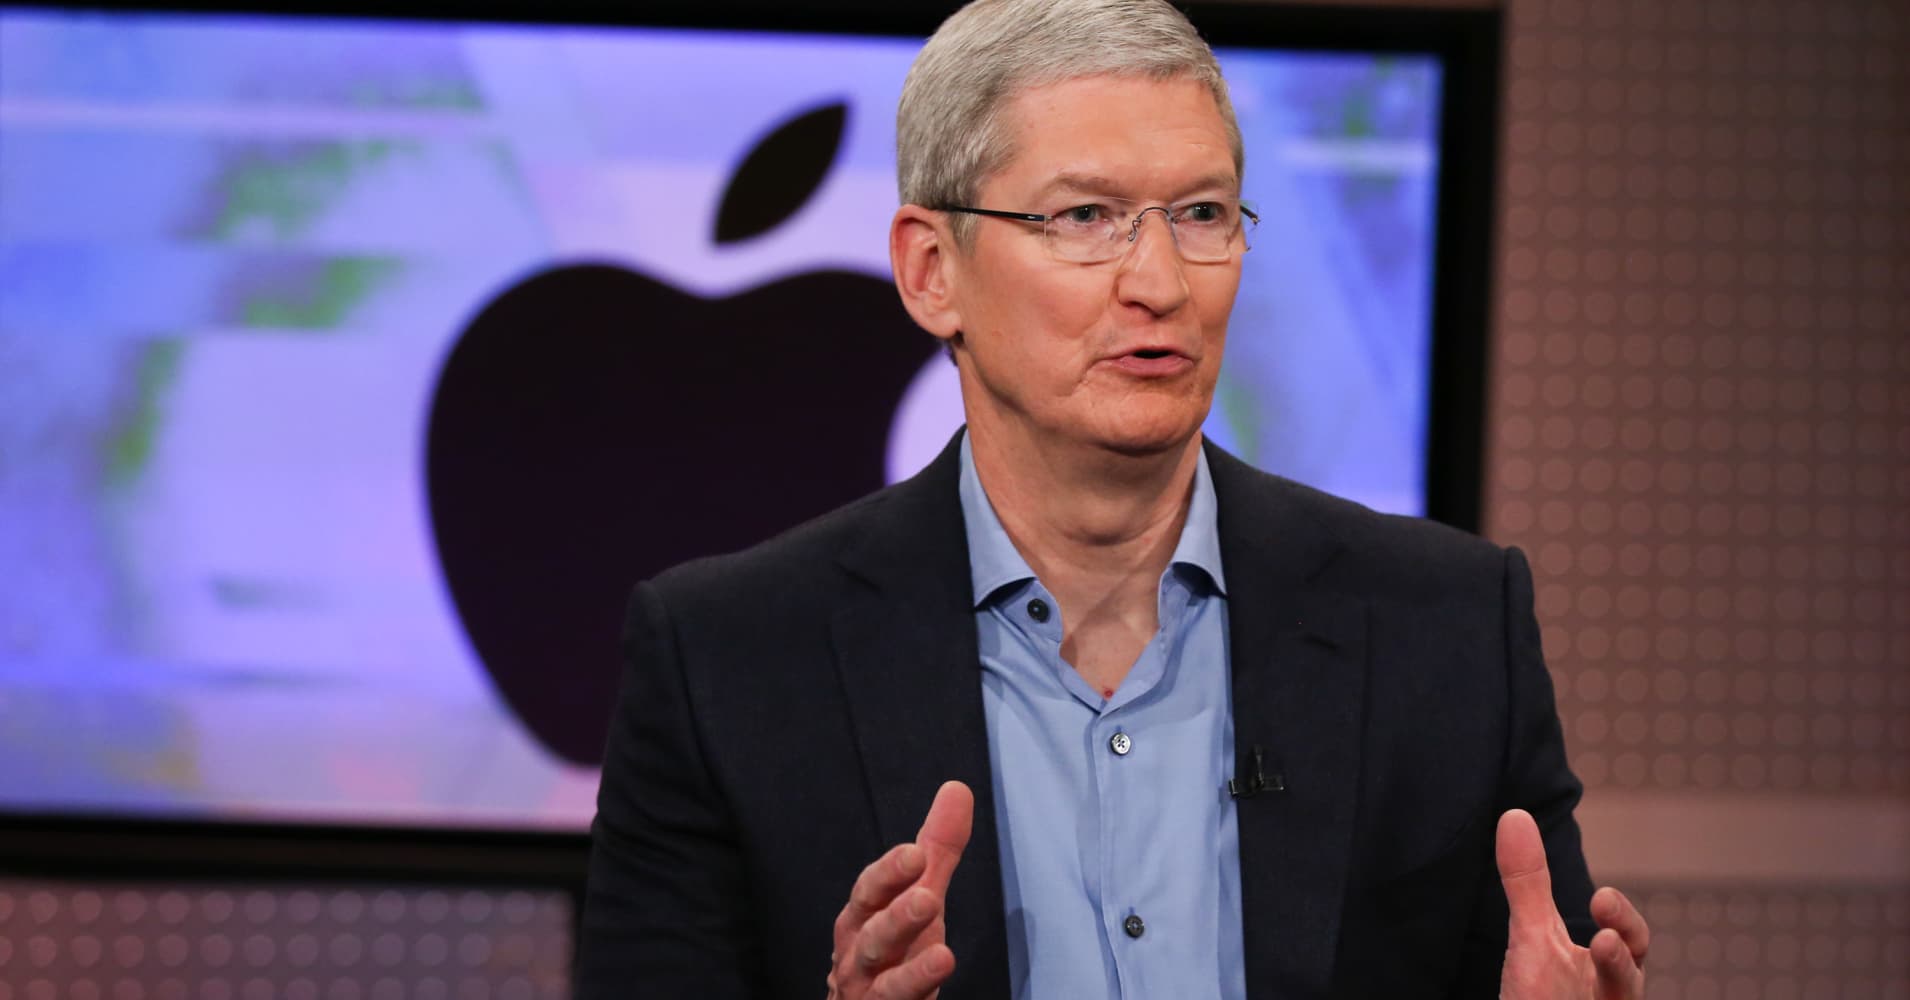 Apple CEO Tim Cook calls for more global trade with China - CNBC